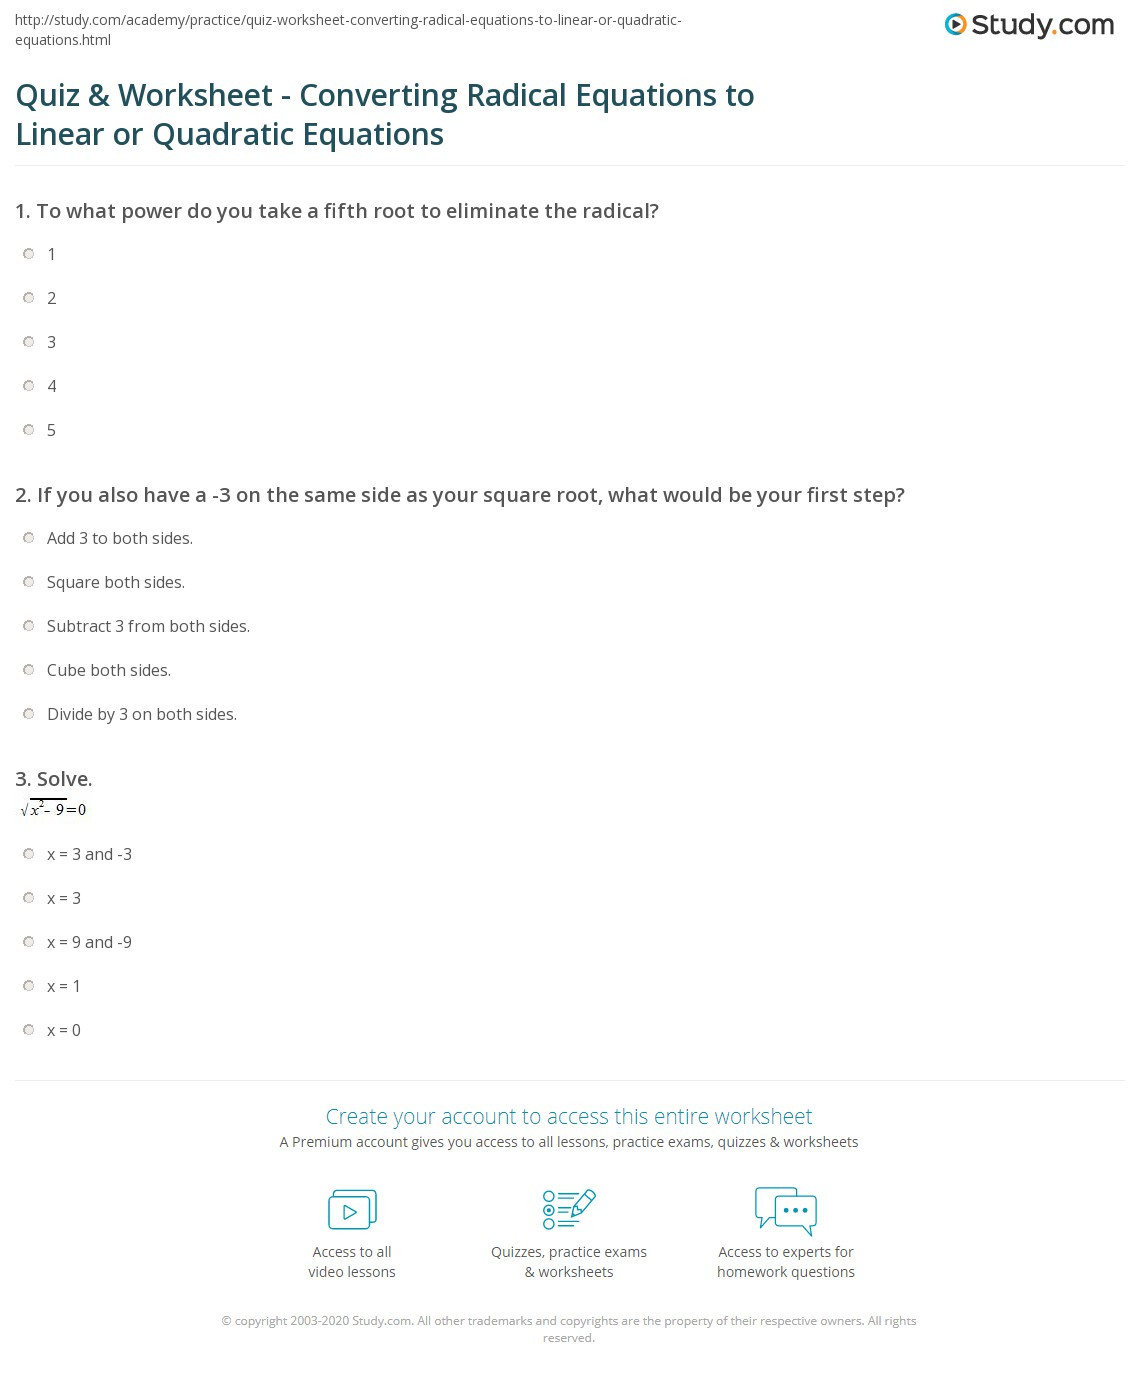 From Linear to Quadratic Worksheet Quiz &amp; Worksheet Converting Radical Equations to Linear or